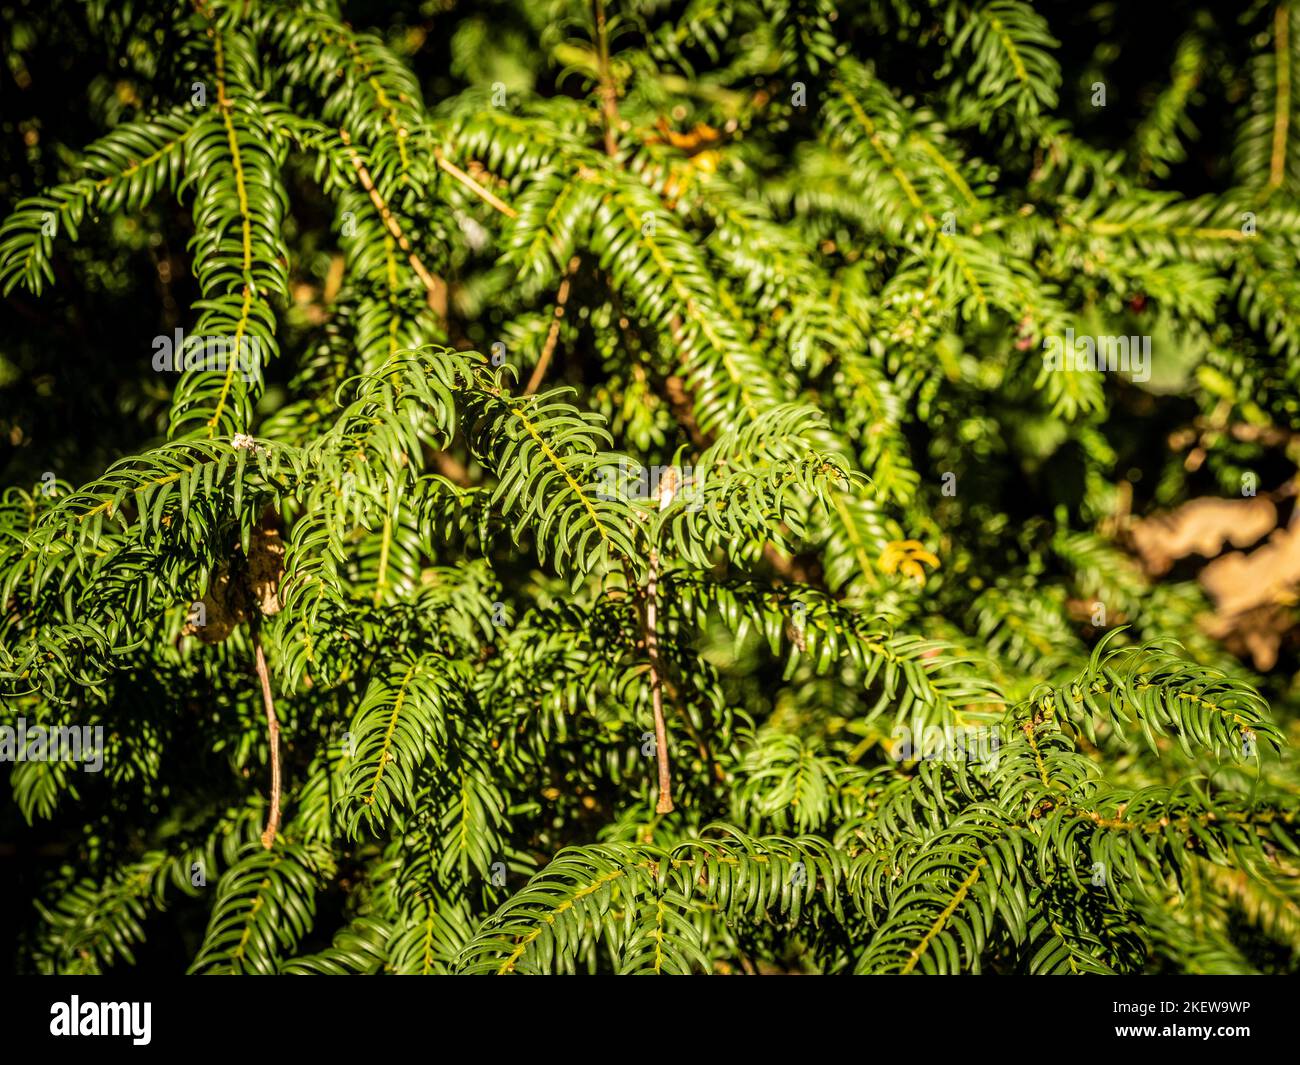 Closeup of the evergreen foliage of Taxus baccata, commonly know as Yew growing in a UK garden. Stock Photo